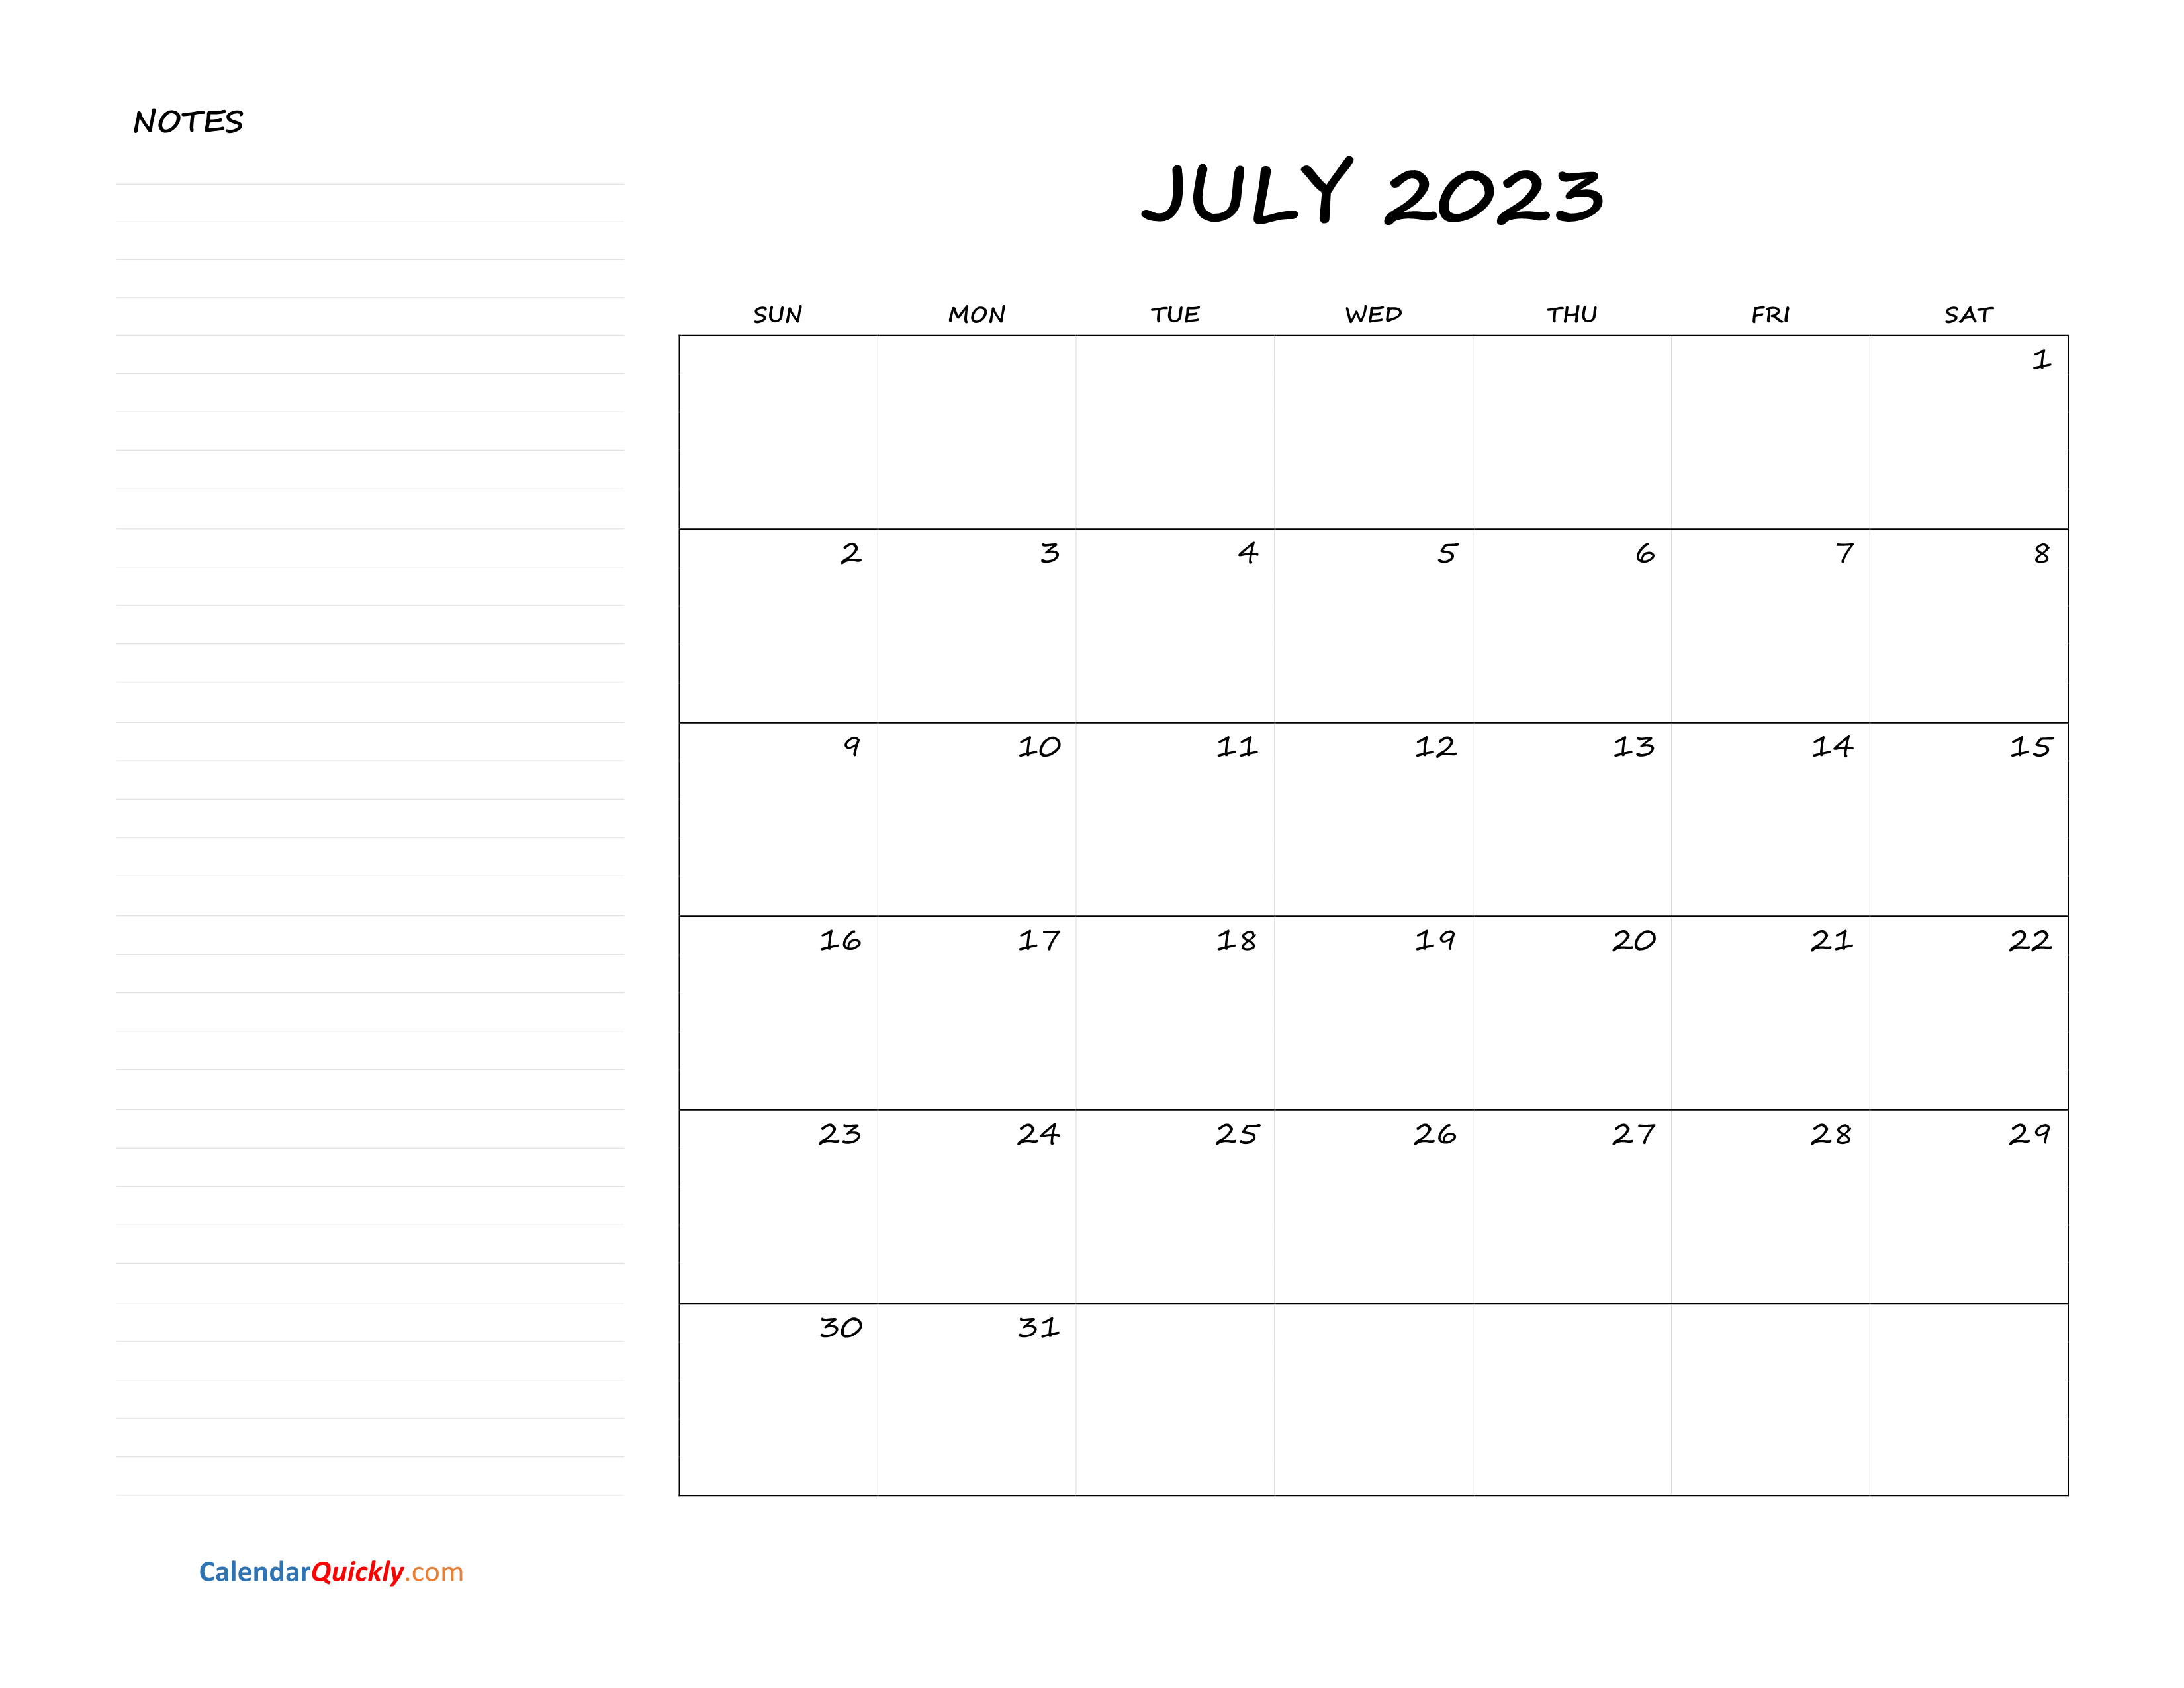 july-blank-calendar-2023-with-notes-calendar-quickly